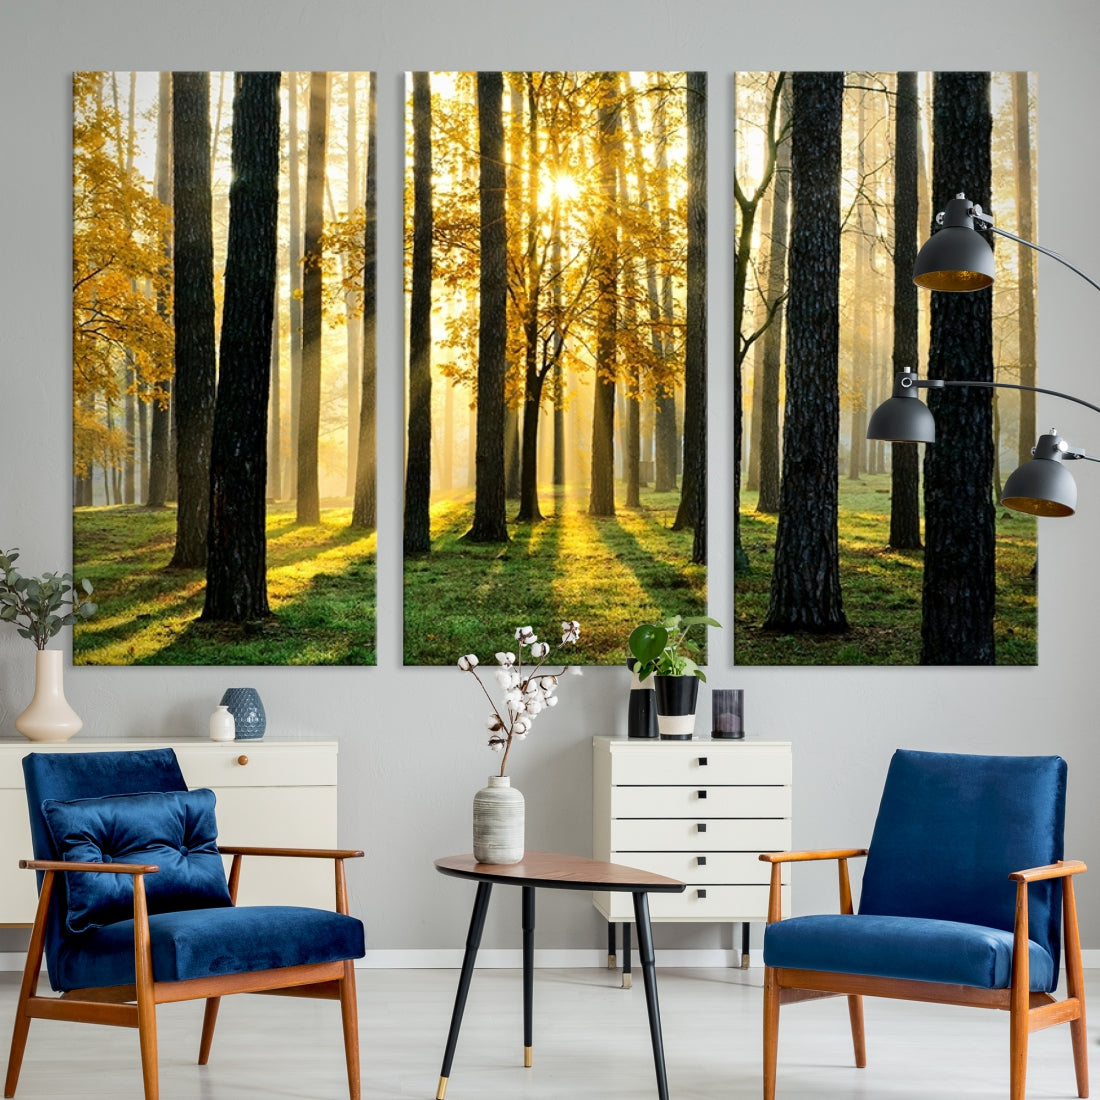 Large Wall Art Landscape Canvas Print - Tall Trees in Forest at Sunset